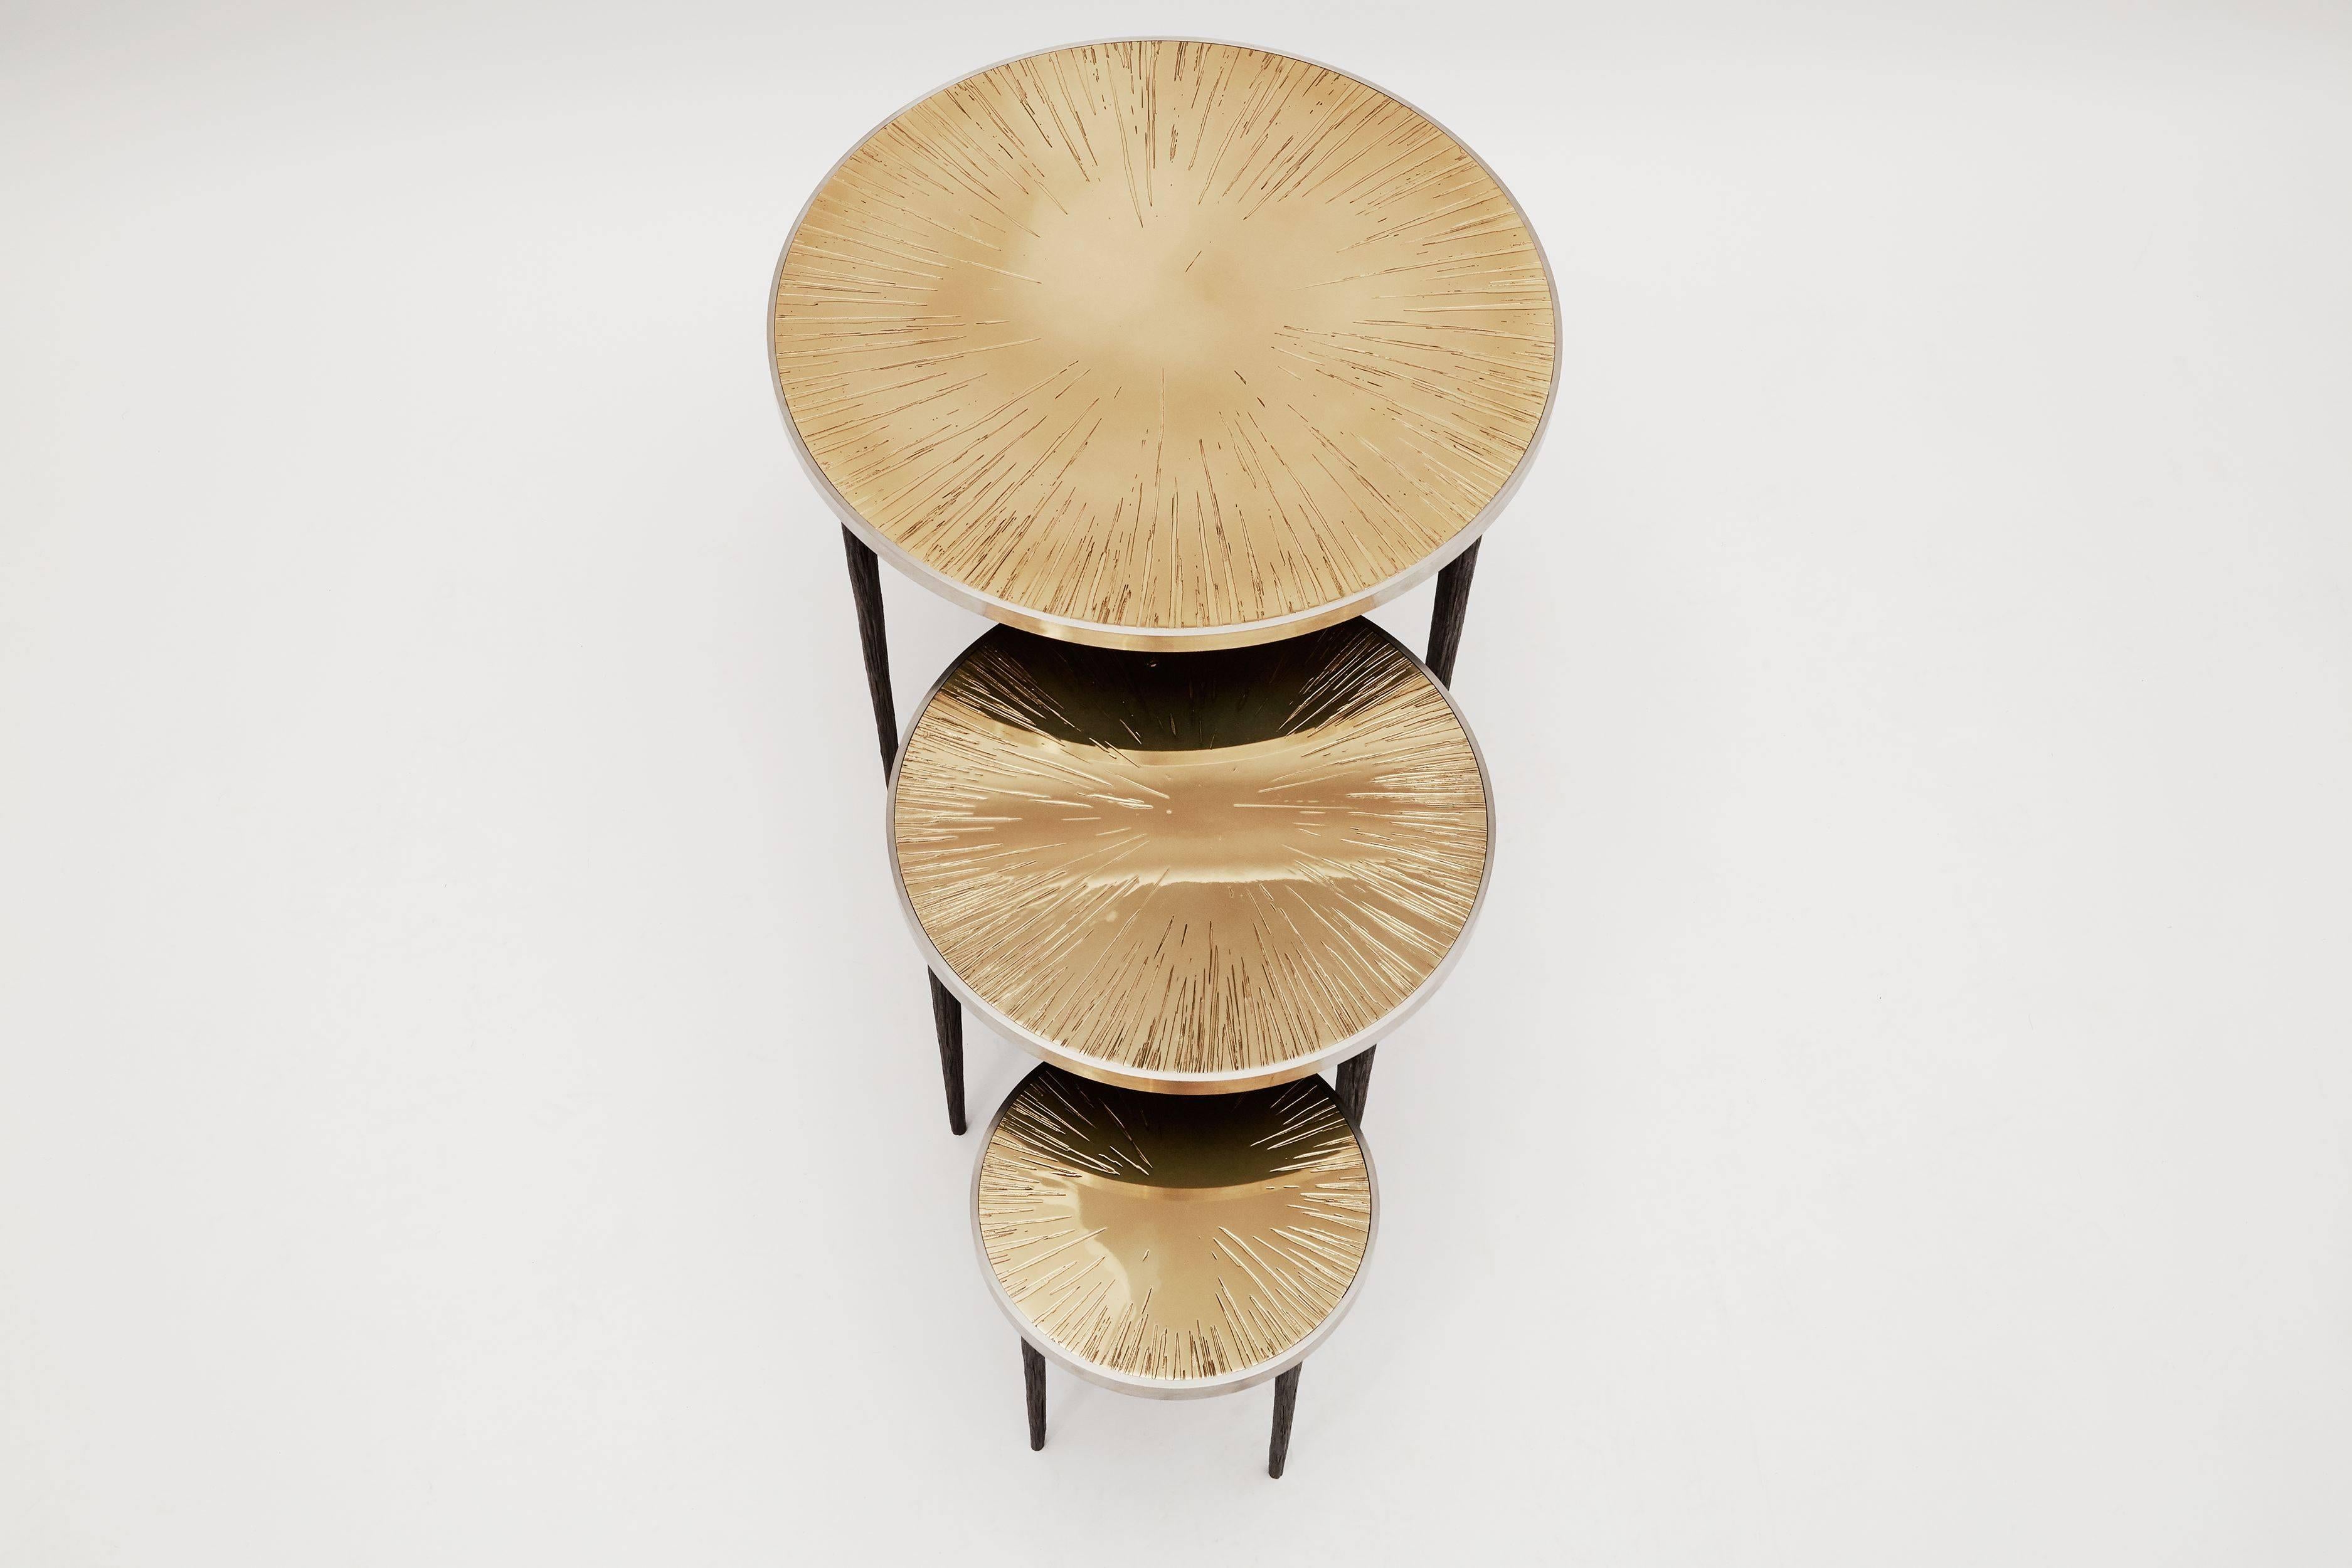 A set of three nesting tables in polished bronze and steel.

Franck Chartrain, born in 1971, is a French artist, furniture designer, and expert metalsmith. His work, known all over the world, is as consistently innovative as it is resolutely in